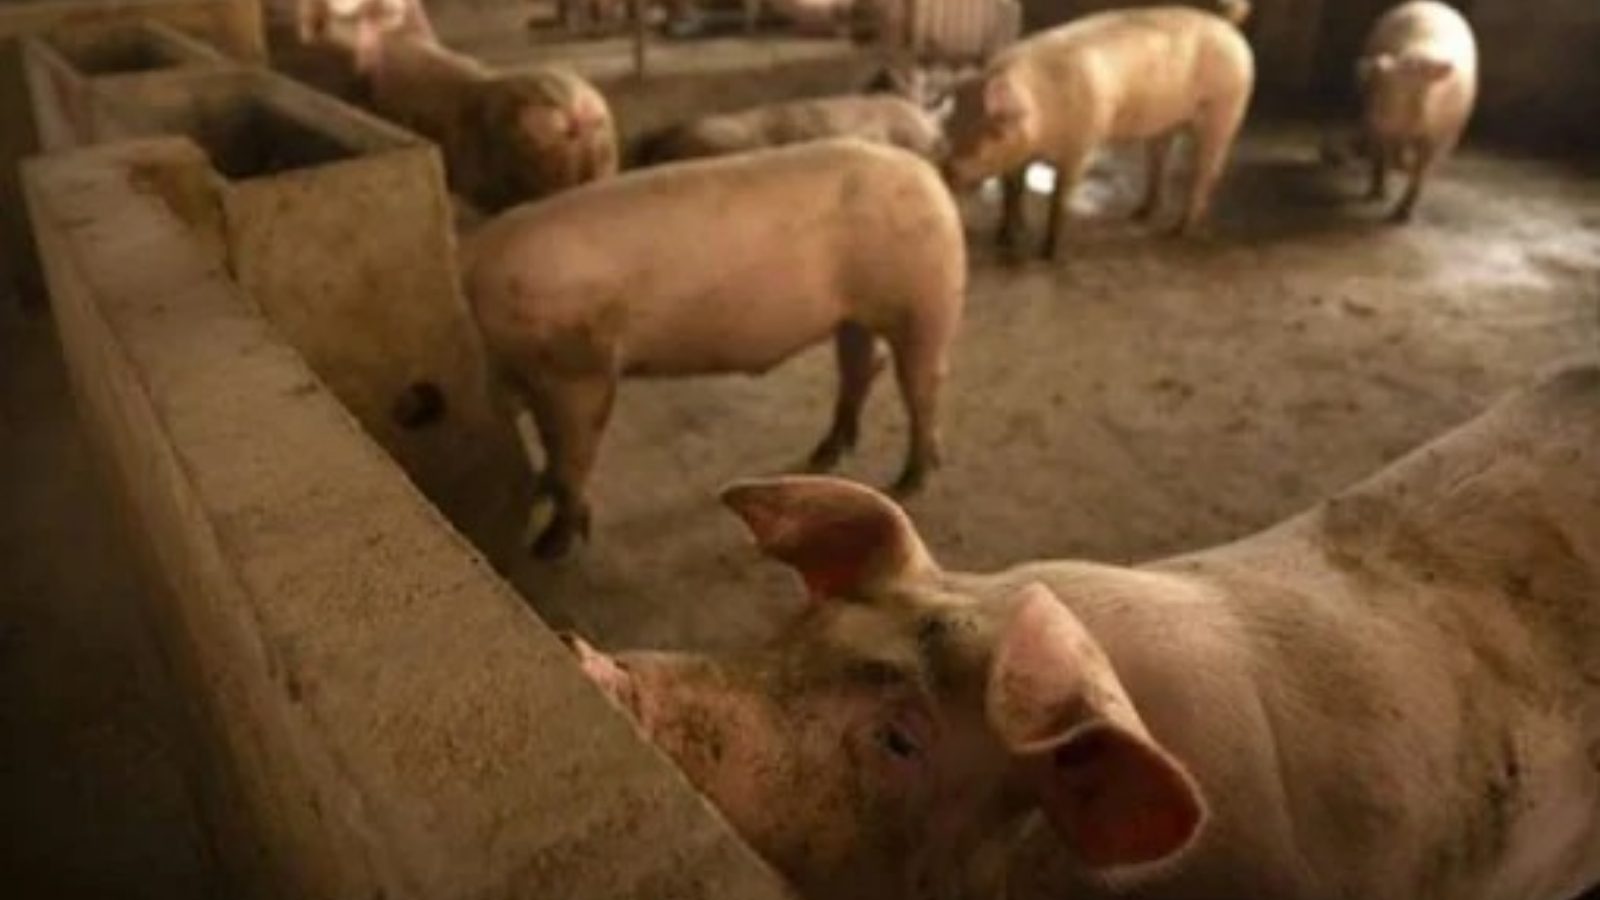 In China, a 13-Storey Building For Pigs To Provide Biosecurity